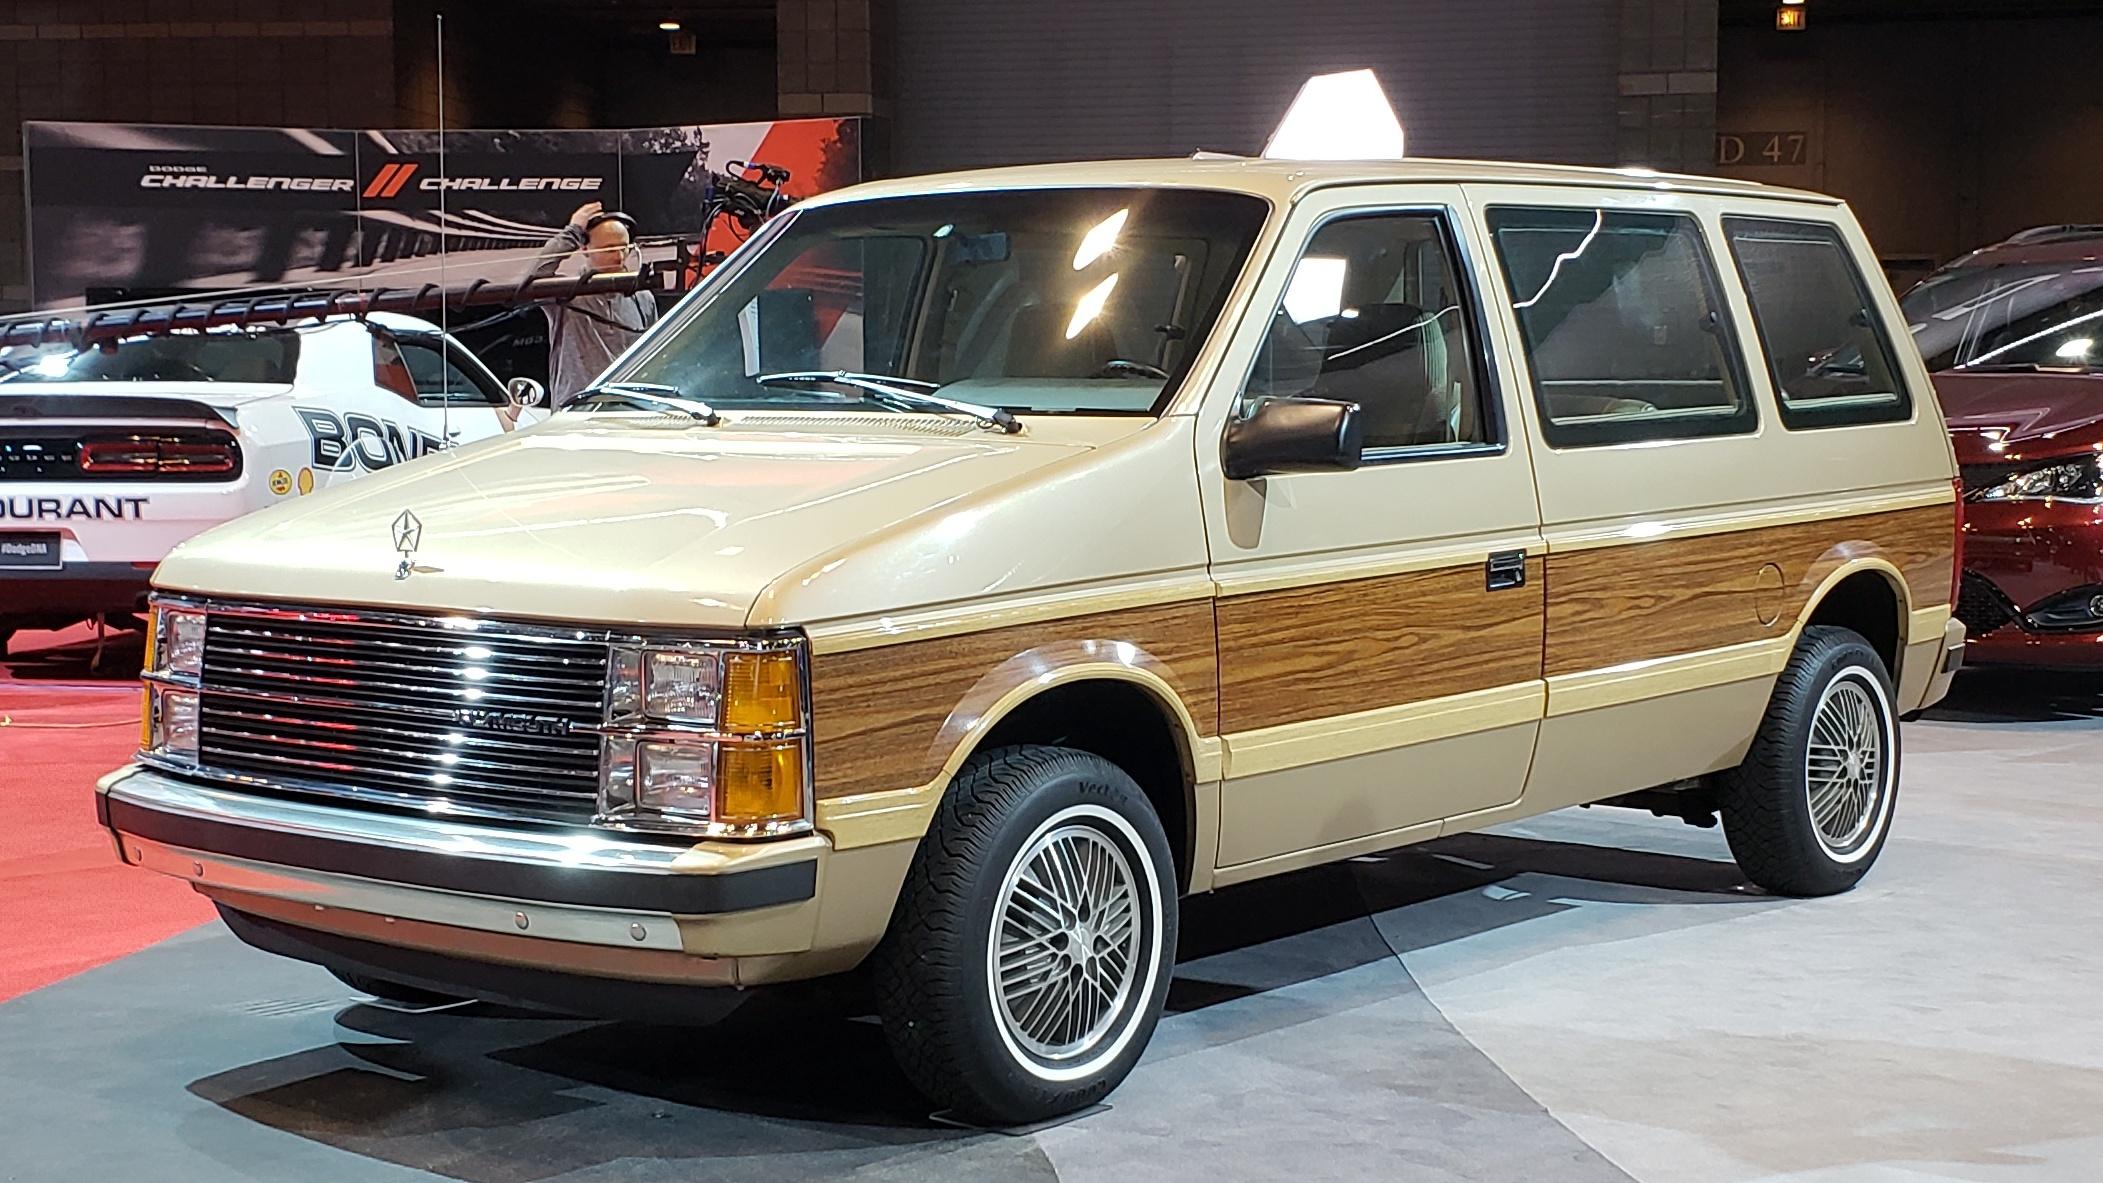 Thought you guys might get a kick out of this minty 1984 Plymouth Voyager  that Chrysler brought to the Chicago Auto Show : r/Autos